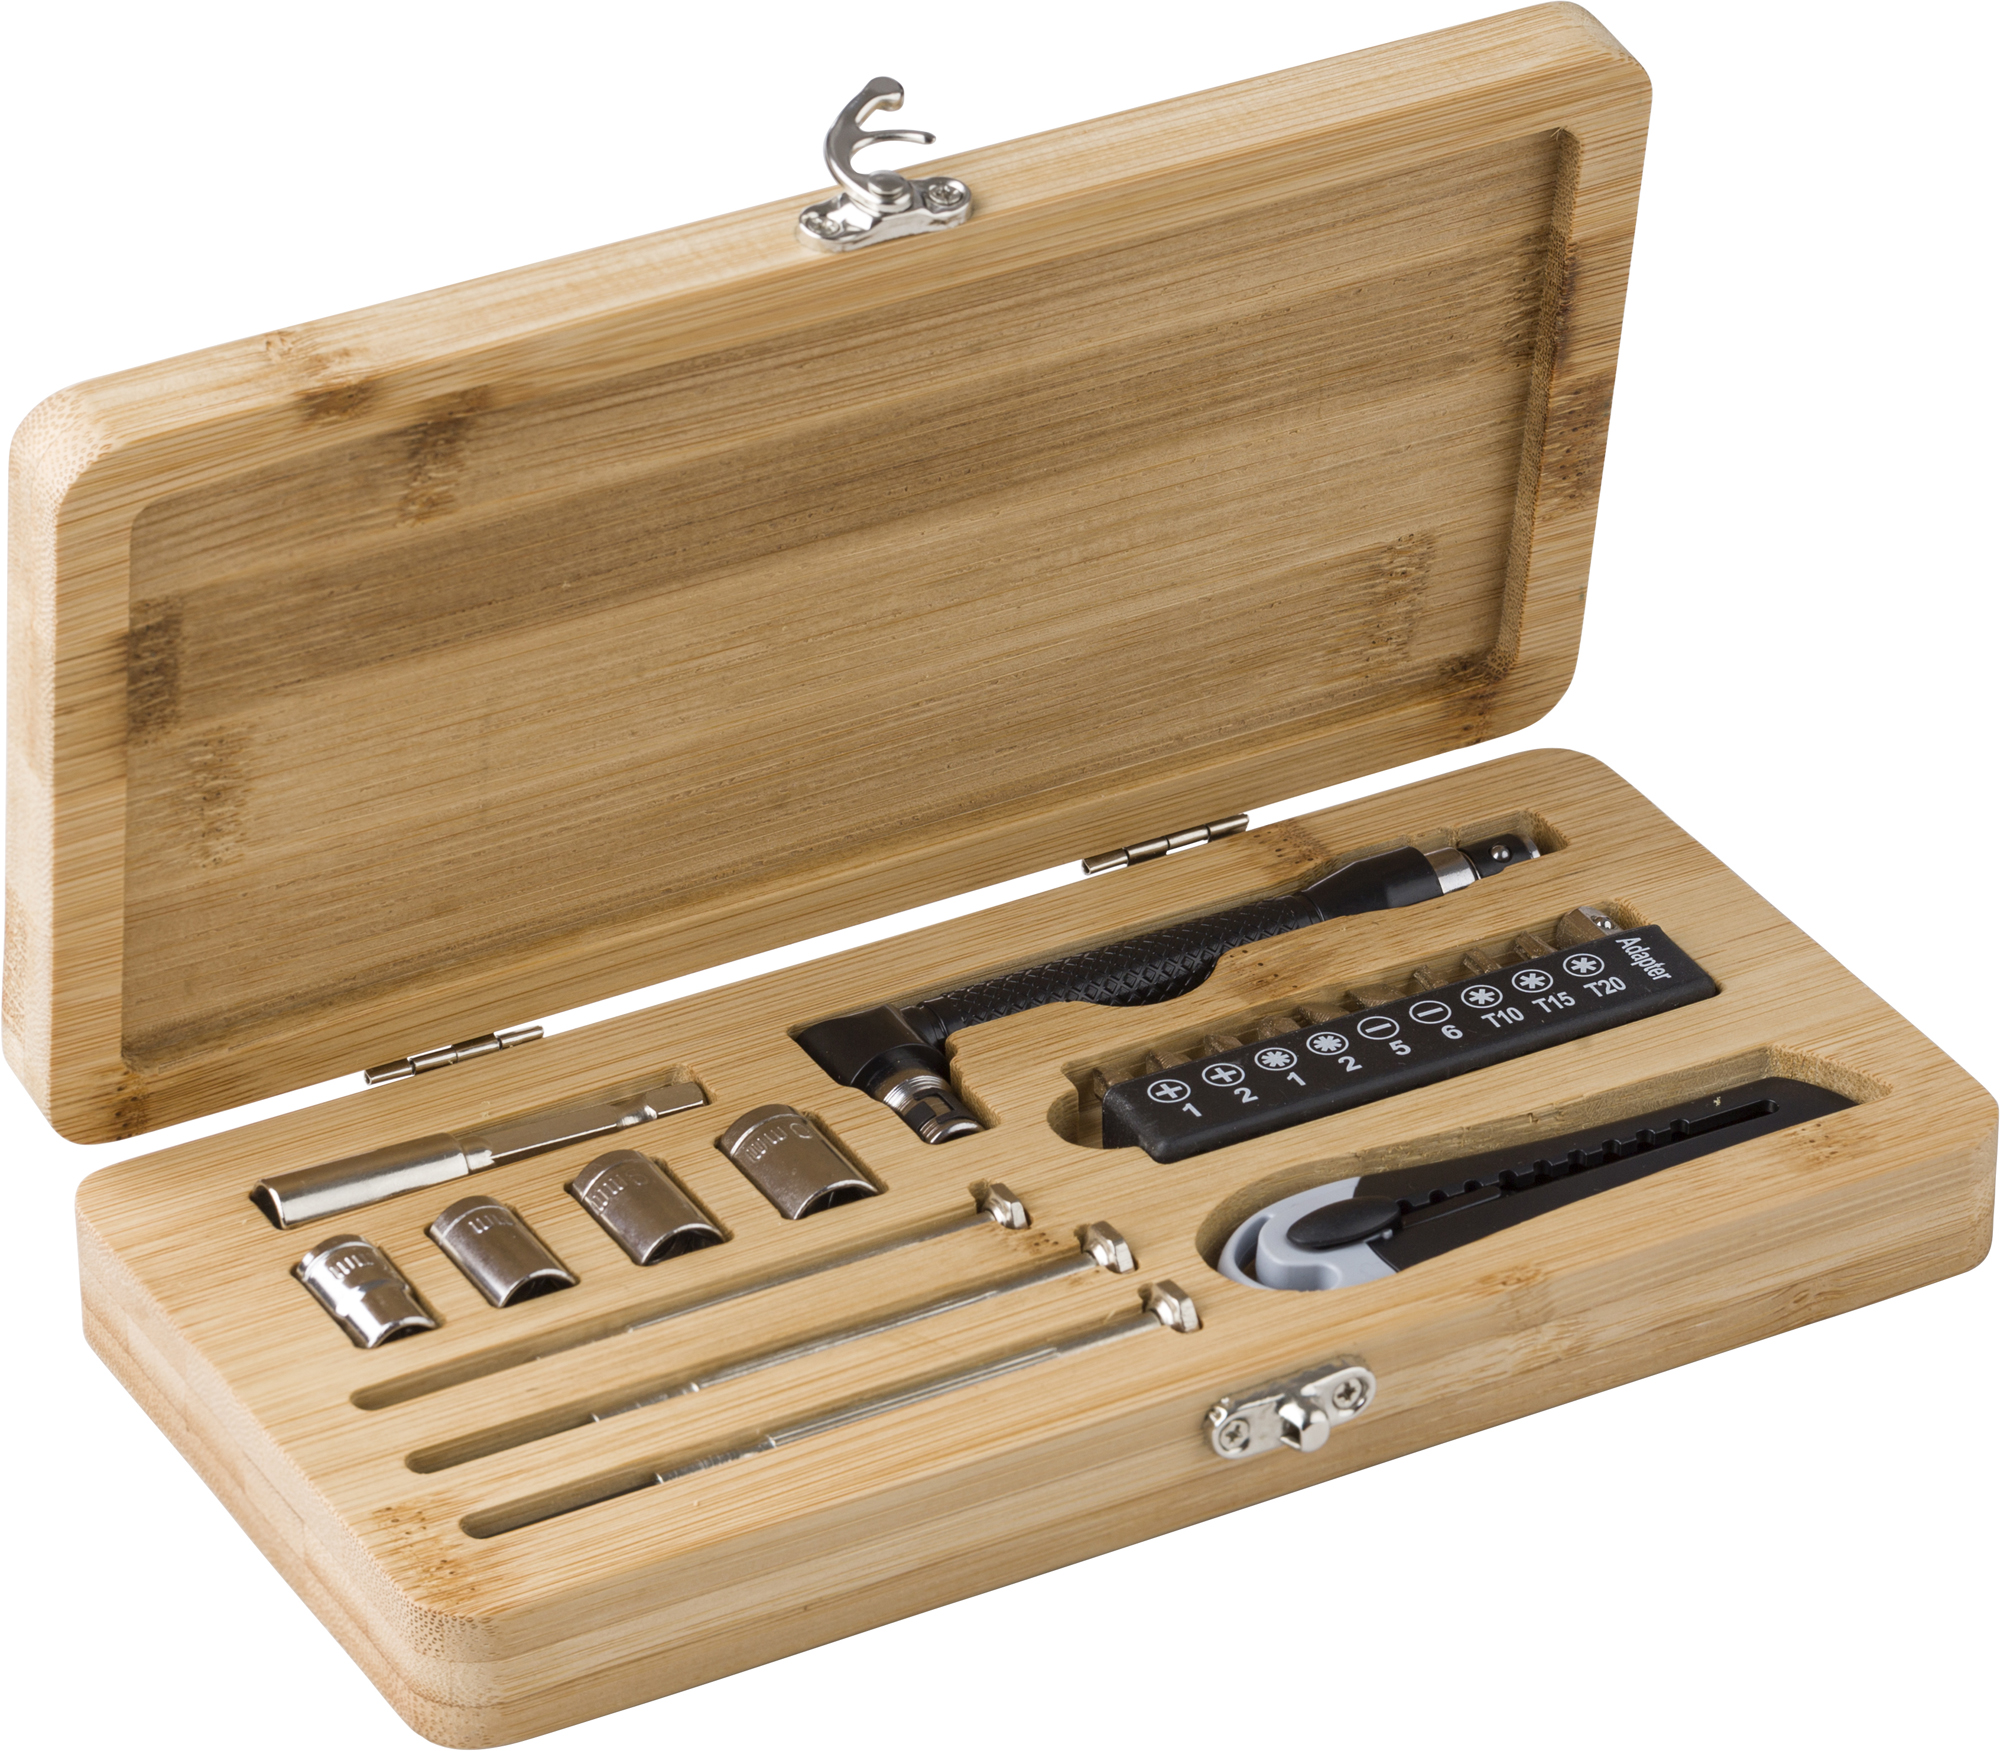 000000866620 011999999 3d135 gbo pro01 2022 fal - Tool set in bamboo case (20pc)